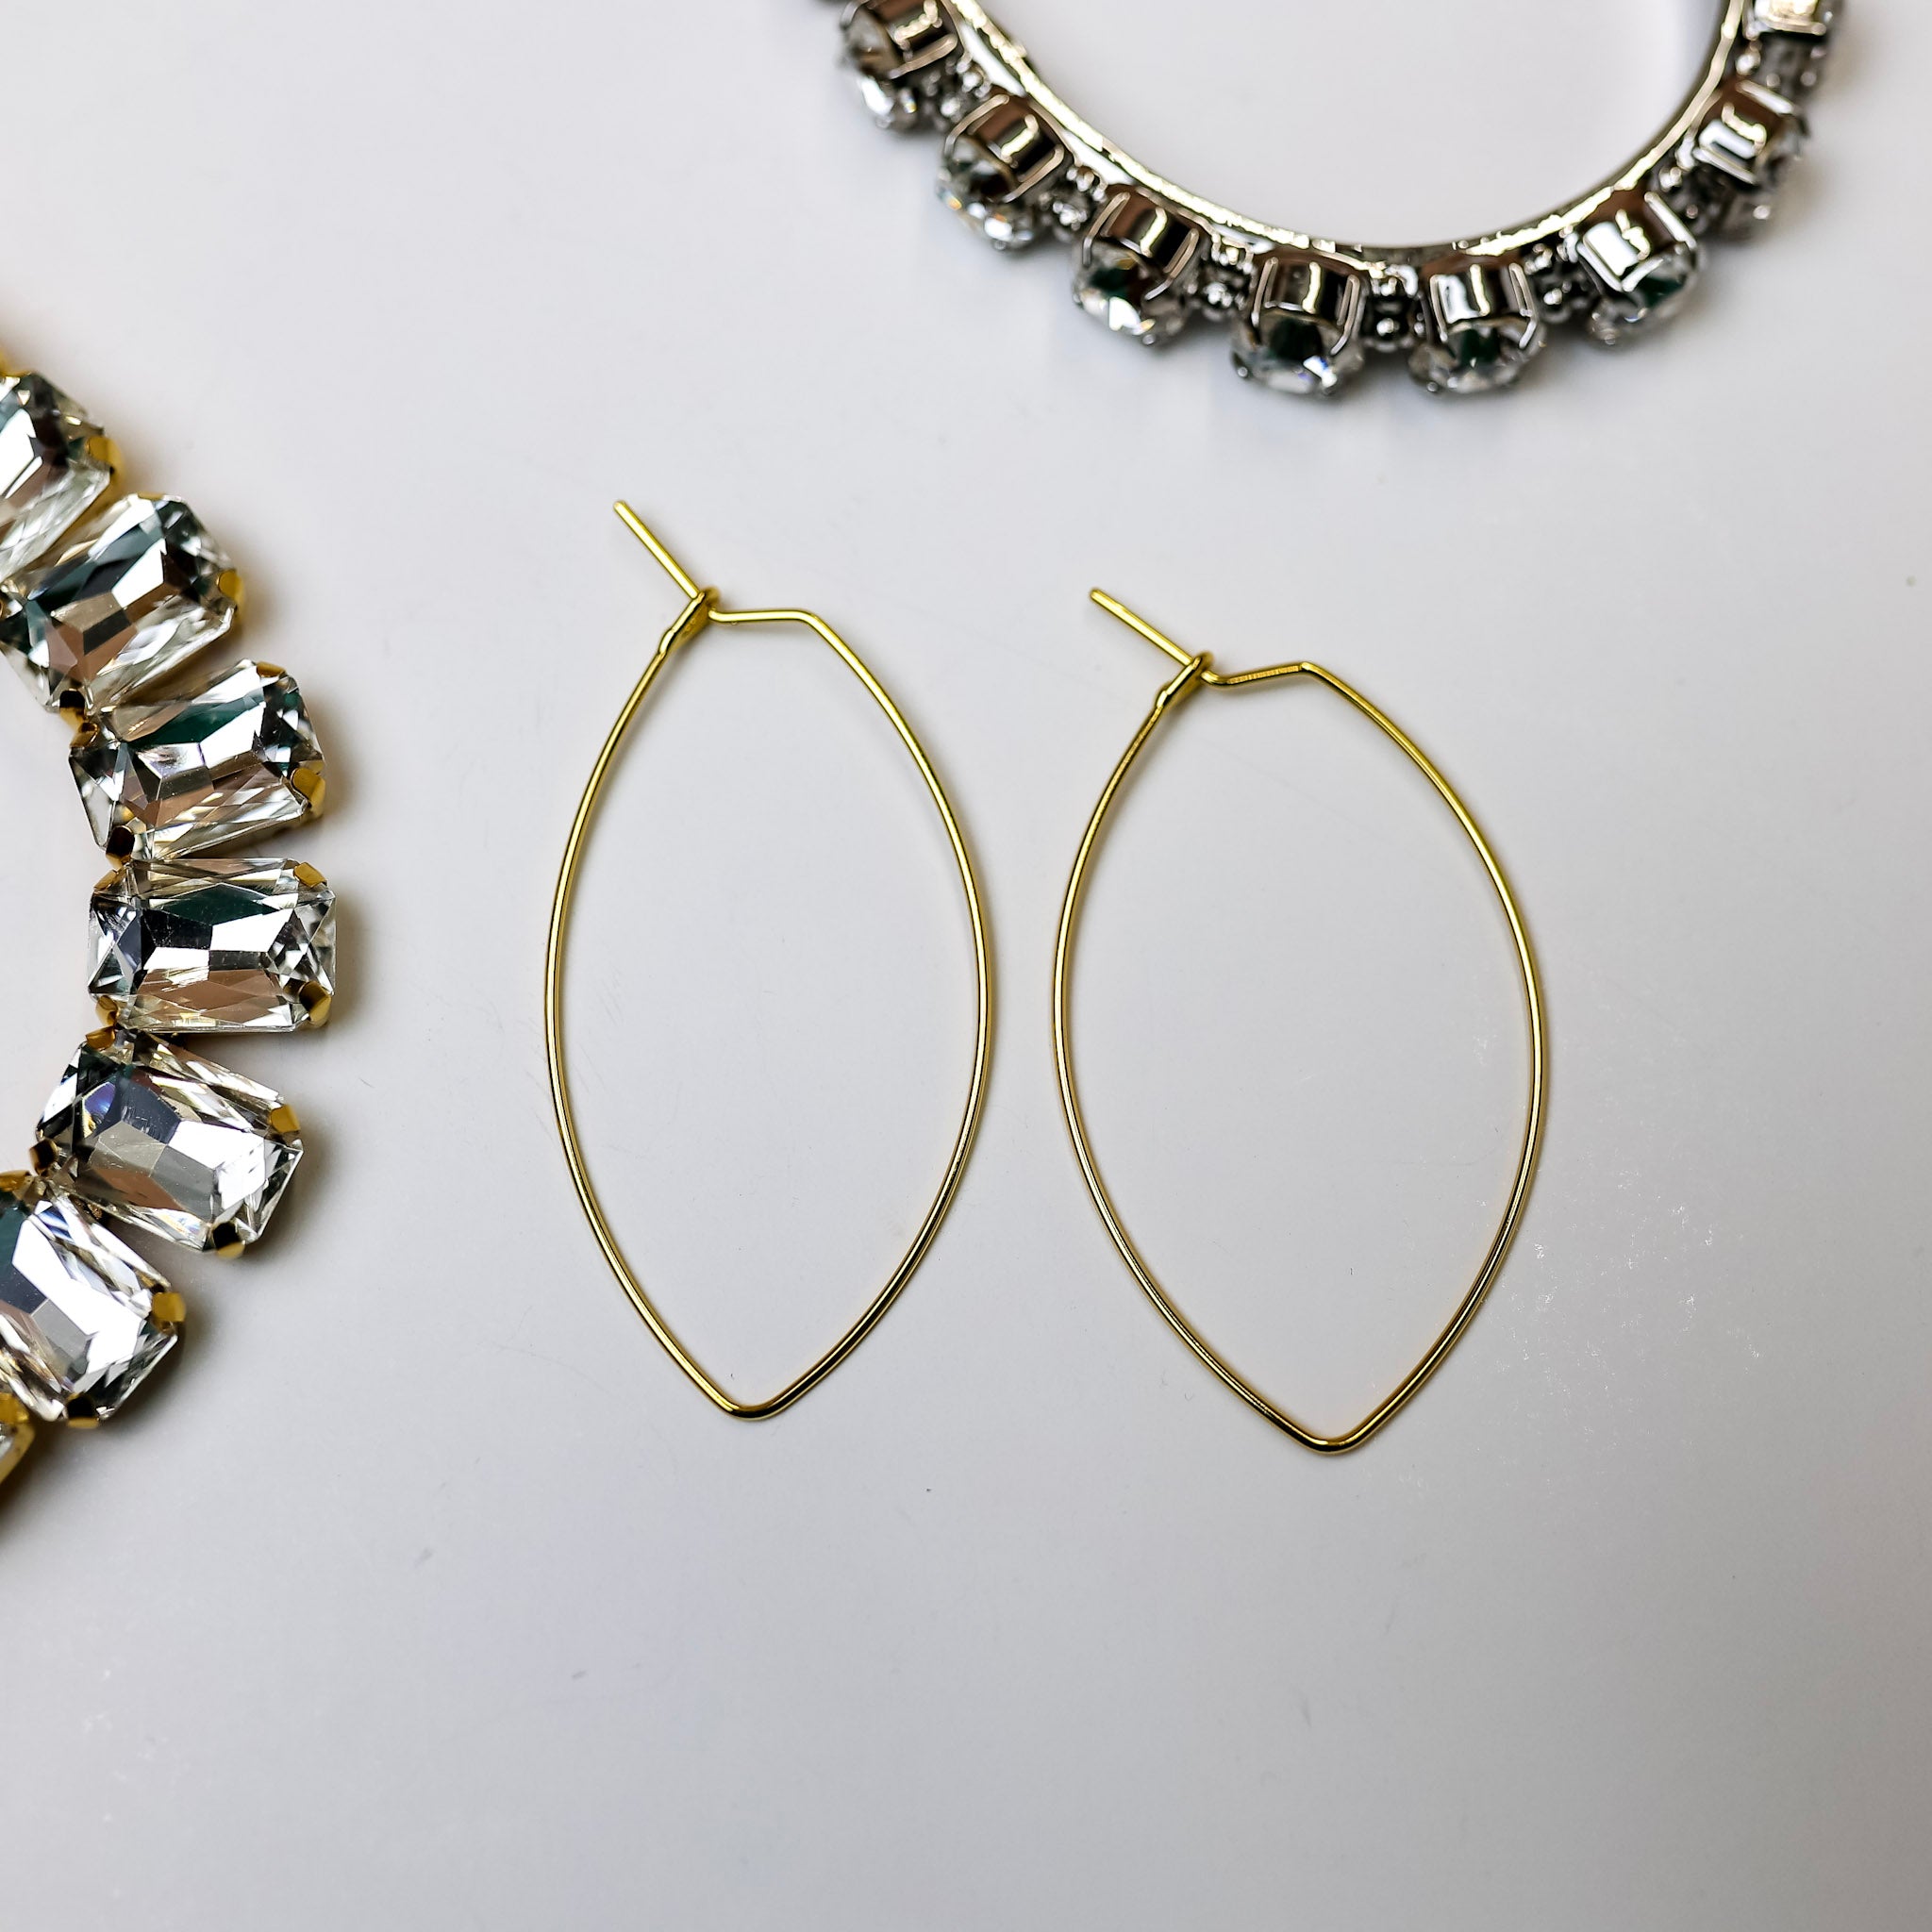 A pair of gold-tone hoop earrings that are cat-eye shape. Pictured on a gold background with crystal necklaces.